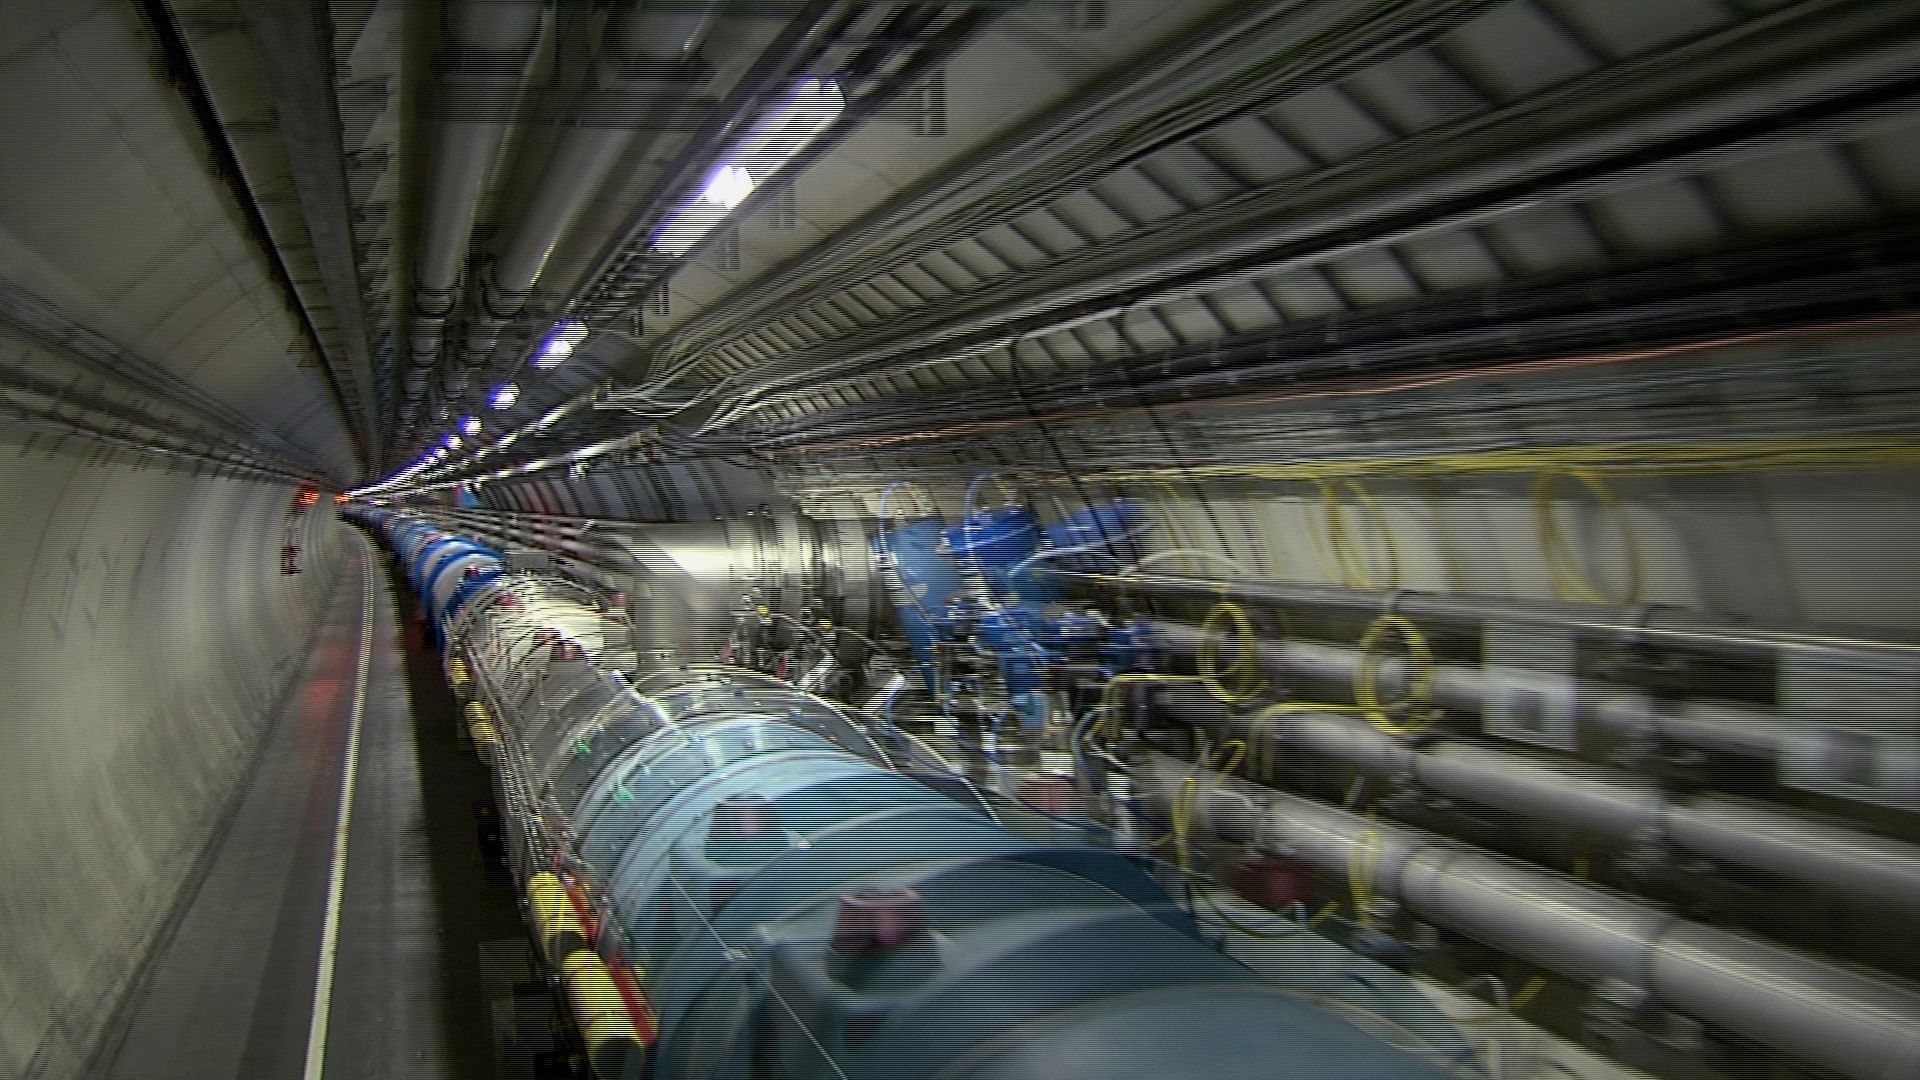 Energy consumption: CERN wants to partially shut down particle accelerators